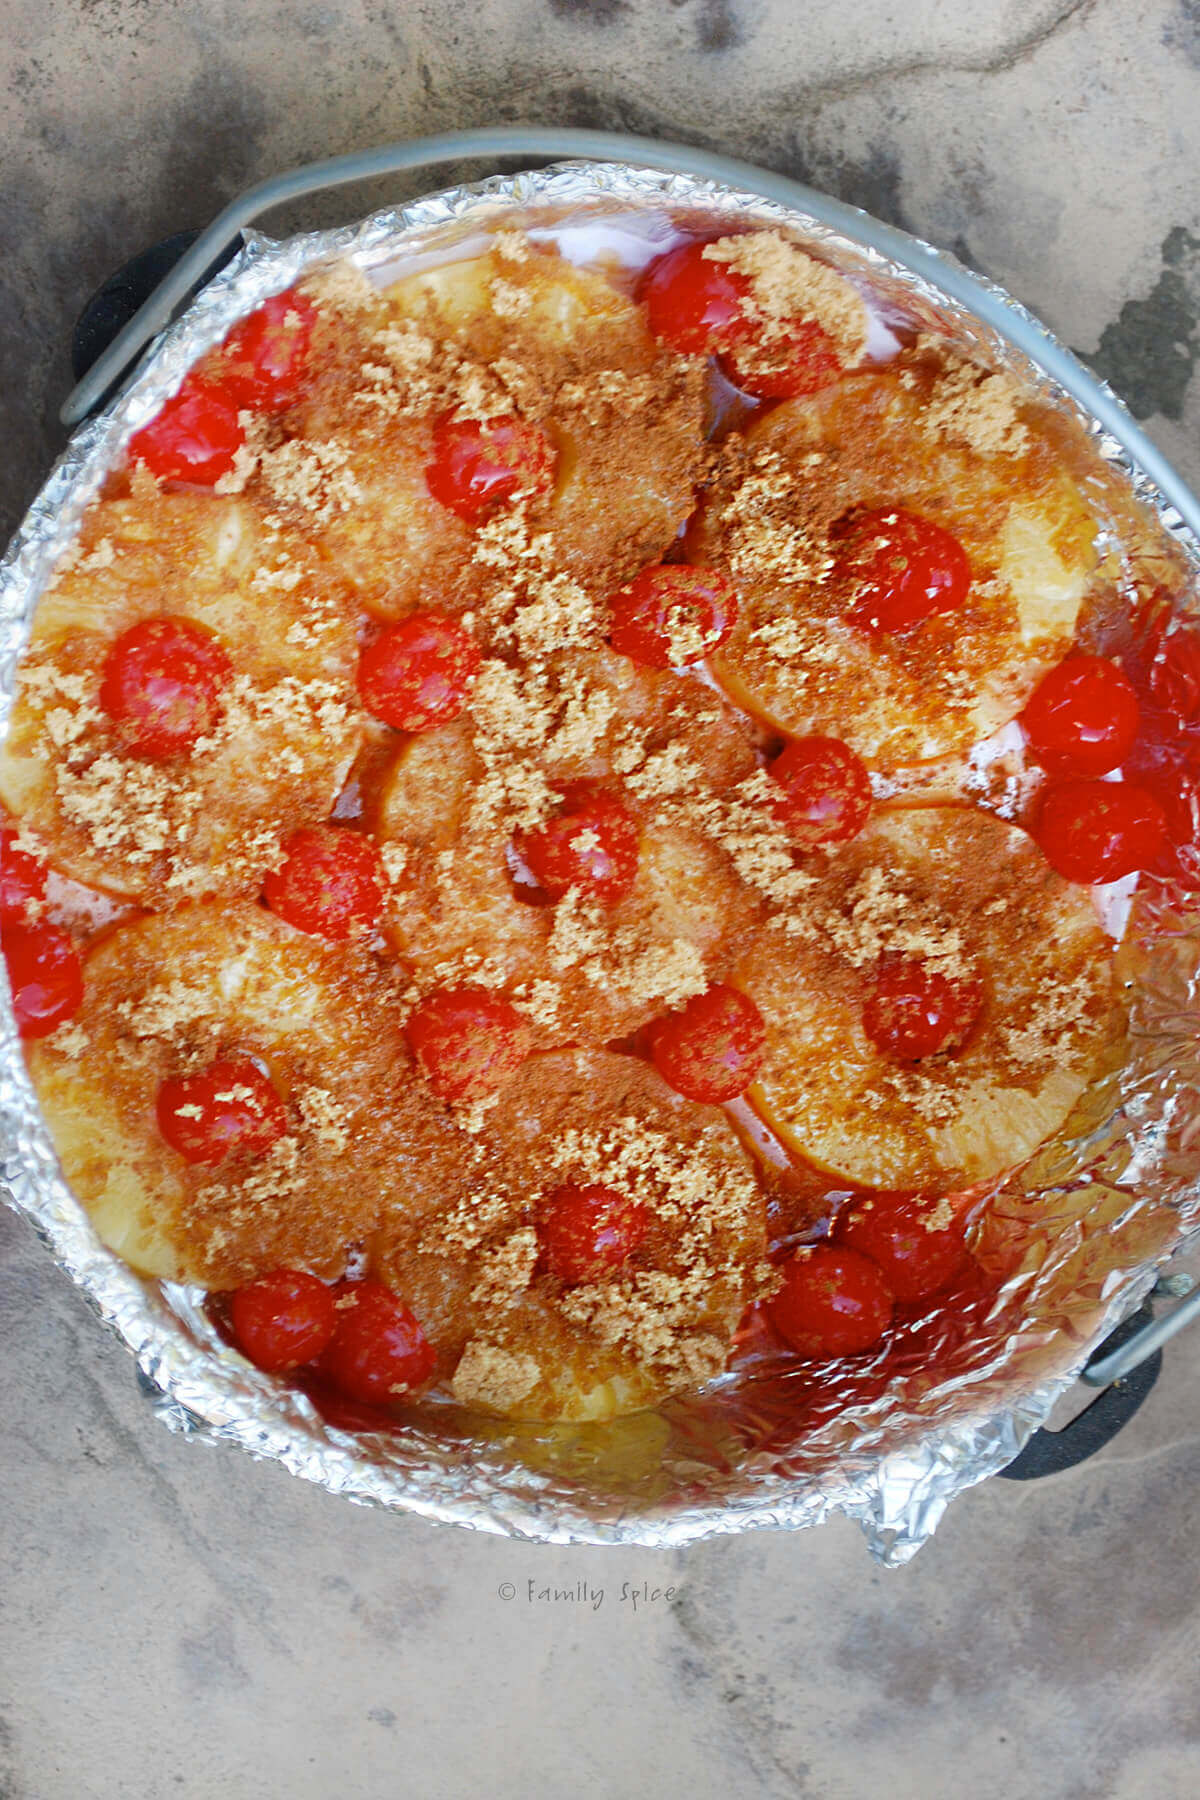 Top view of a Dutch oven lined with foil with pineapple rings, maraschino cherries and sprinkled with brown sugar